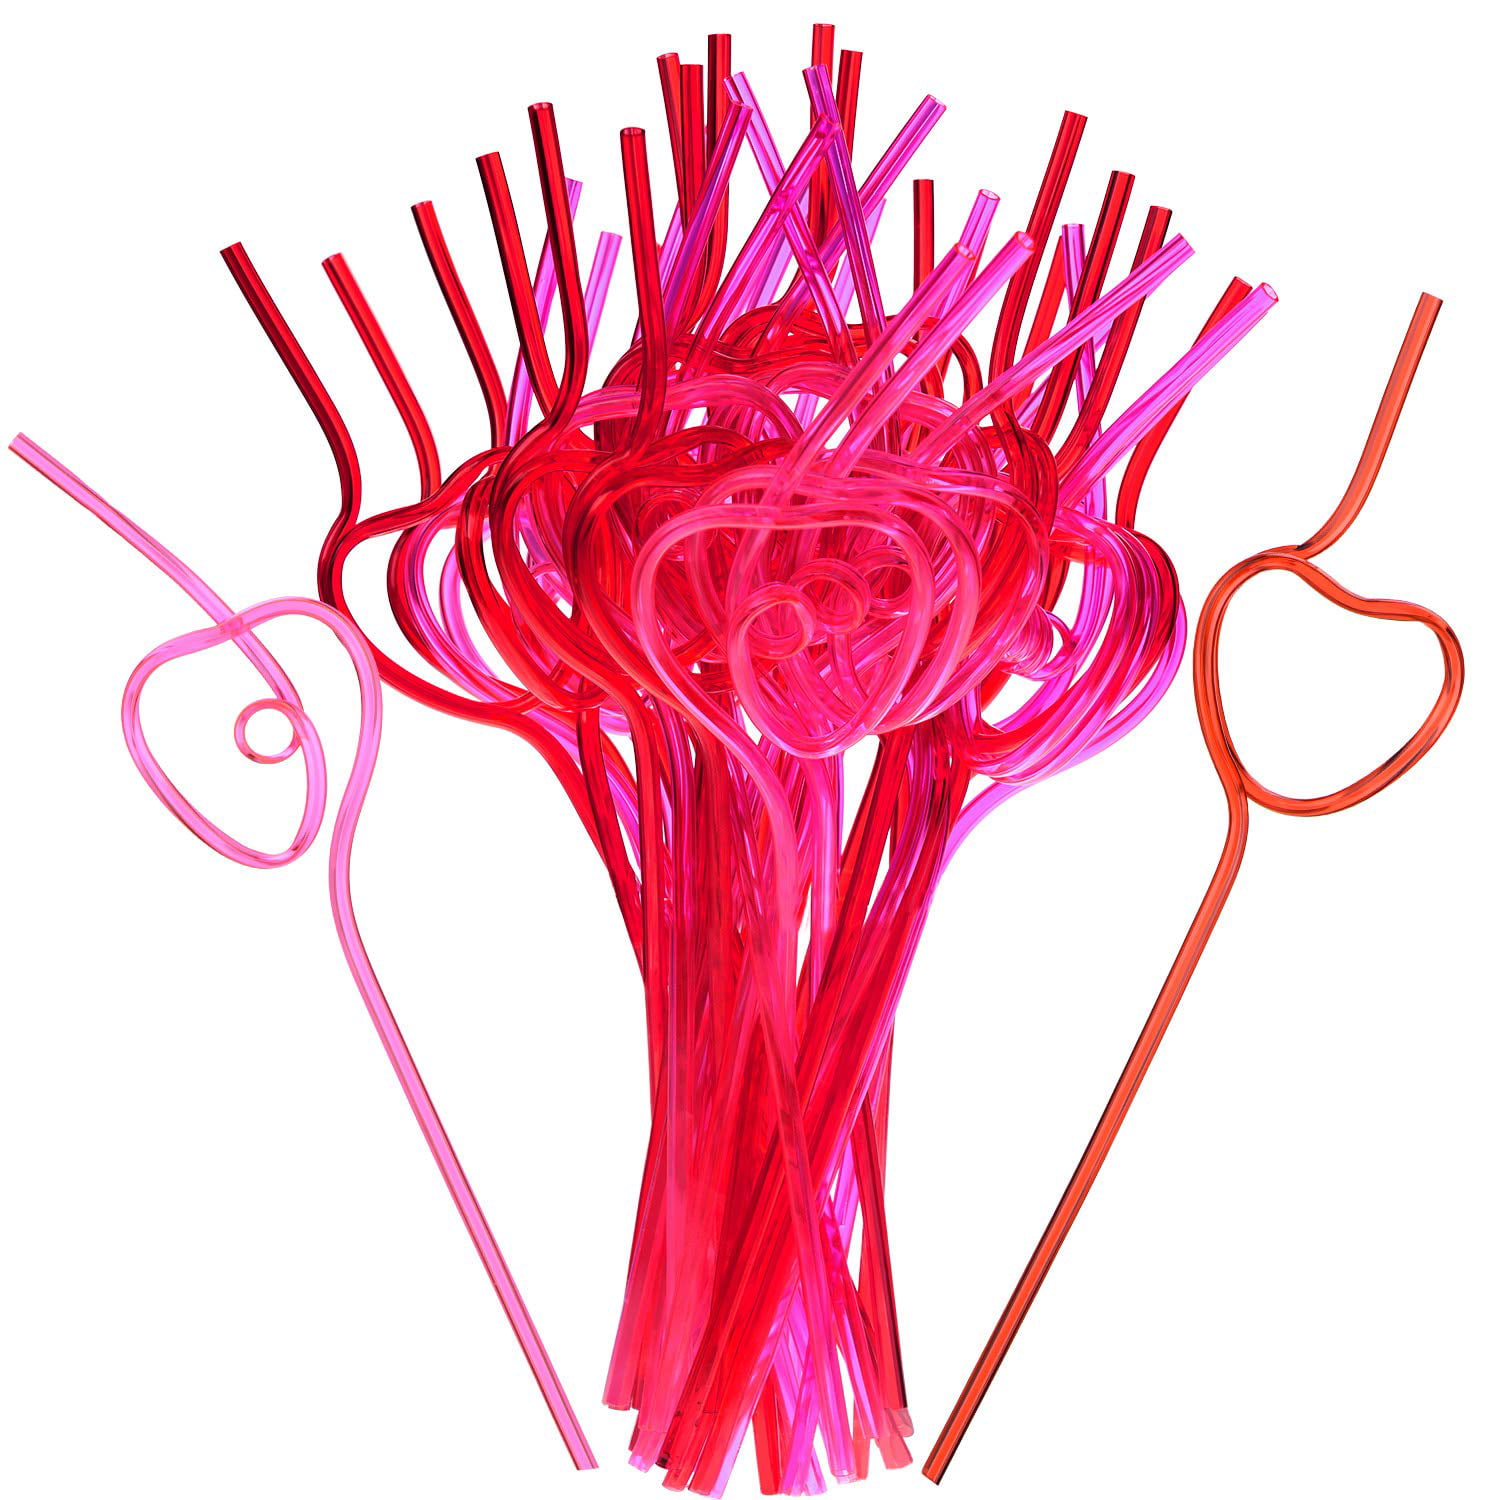 Amsthow Valentines Straws Pink Heart Shaped Straws Heart Silly Disposable Drinking Plastic Individually Wrapped Straws for Drinking, Chai, Shakes